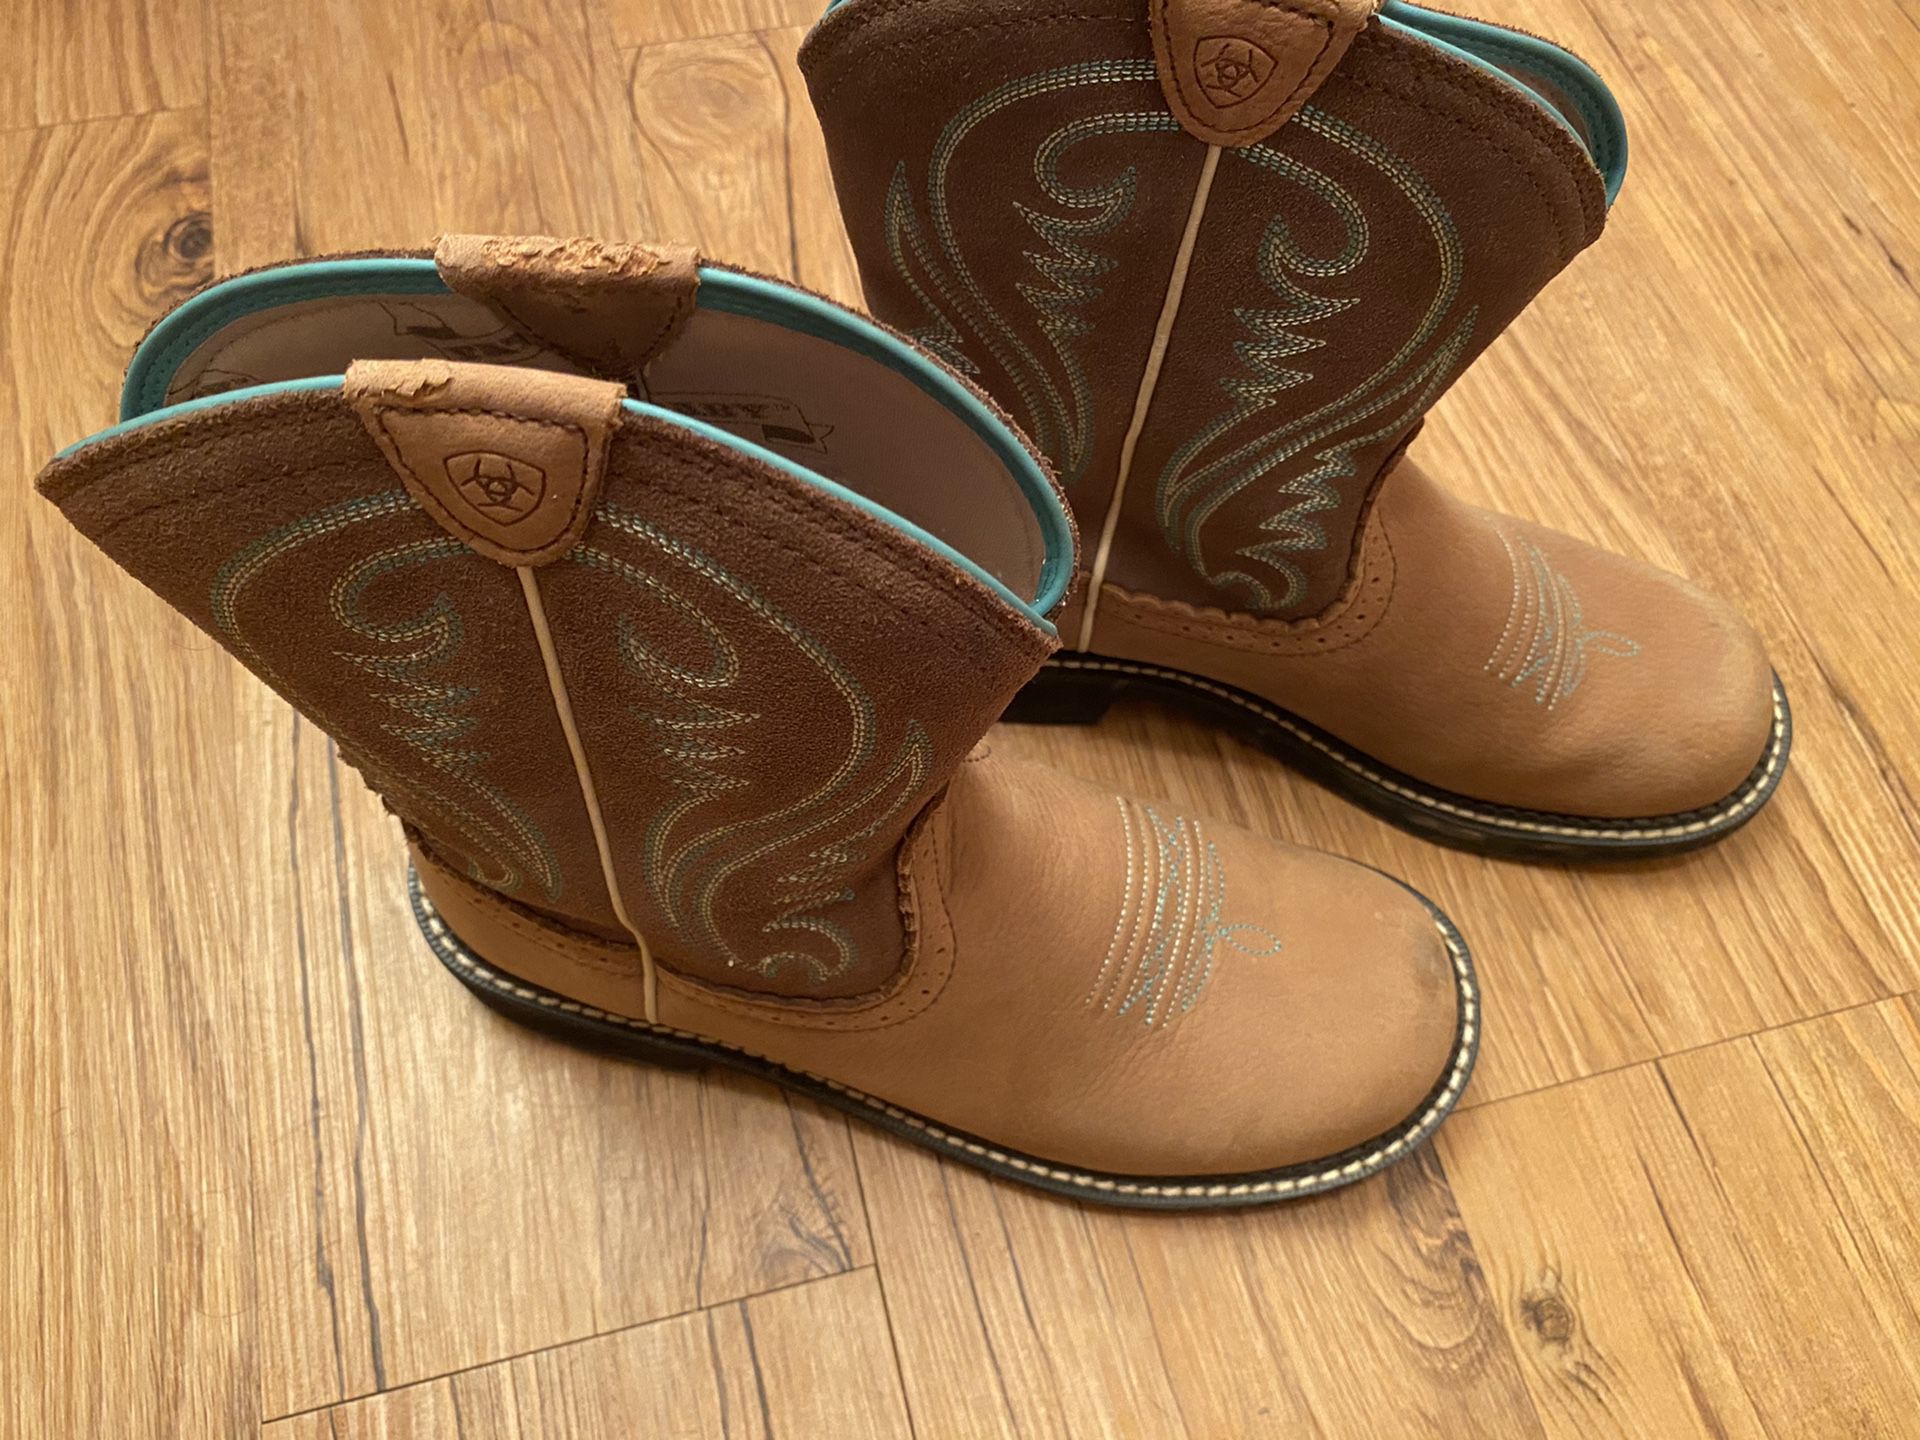 Ariat Fatbaby boots